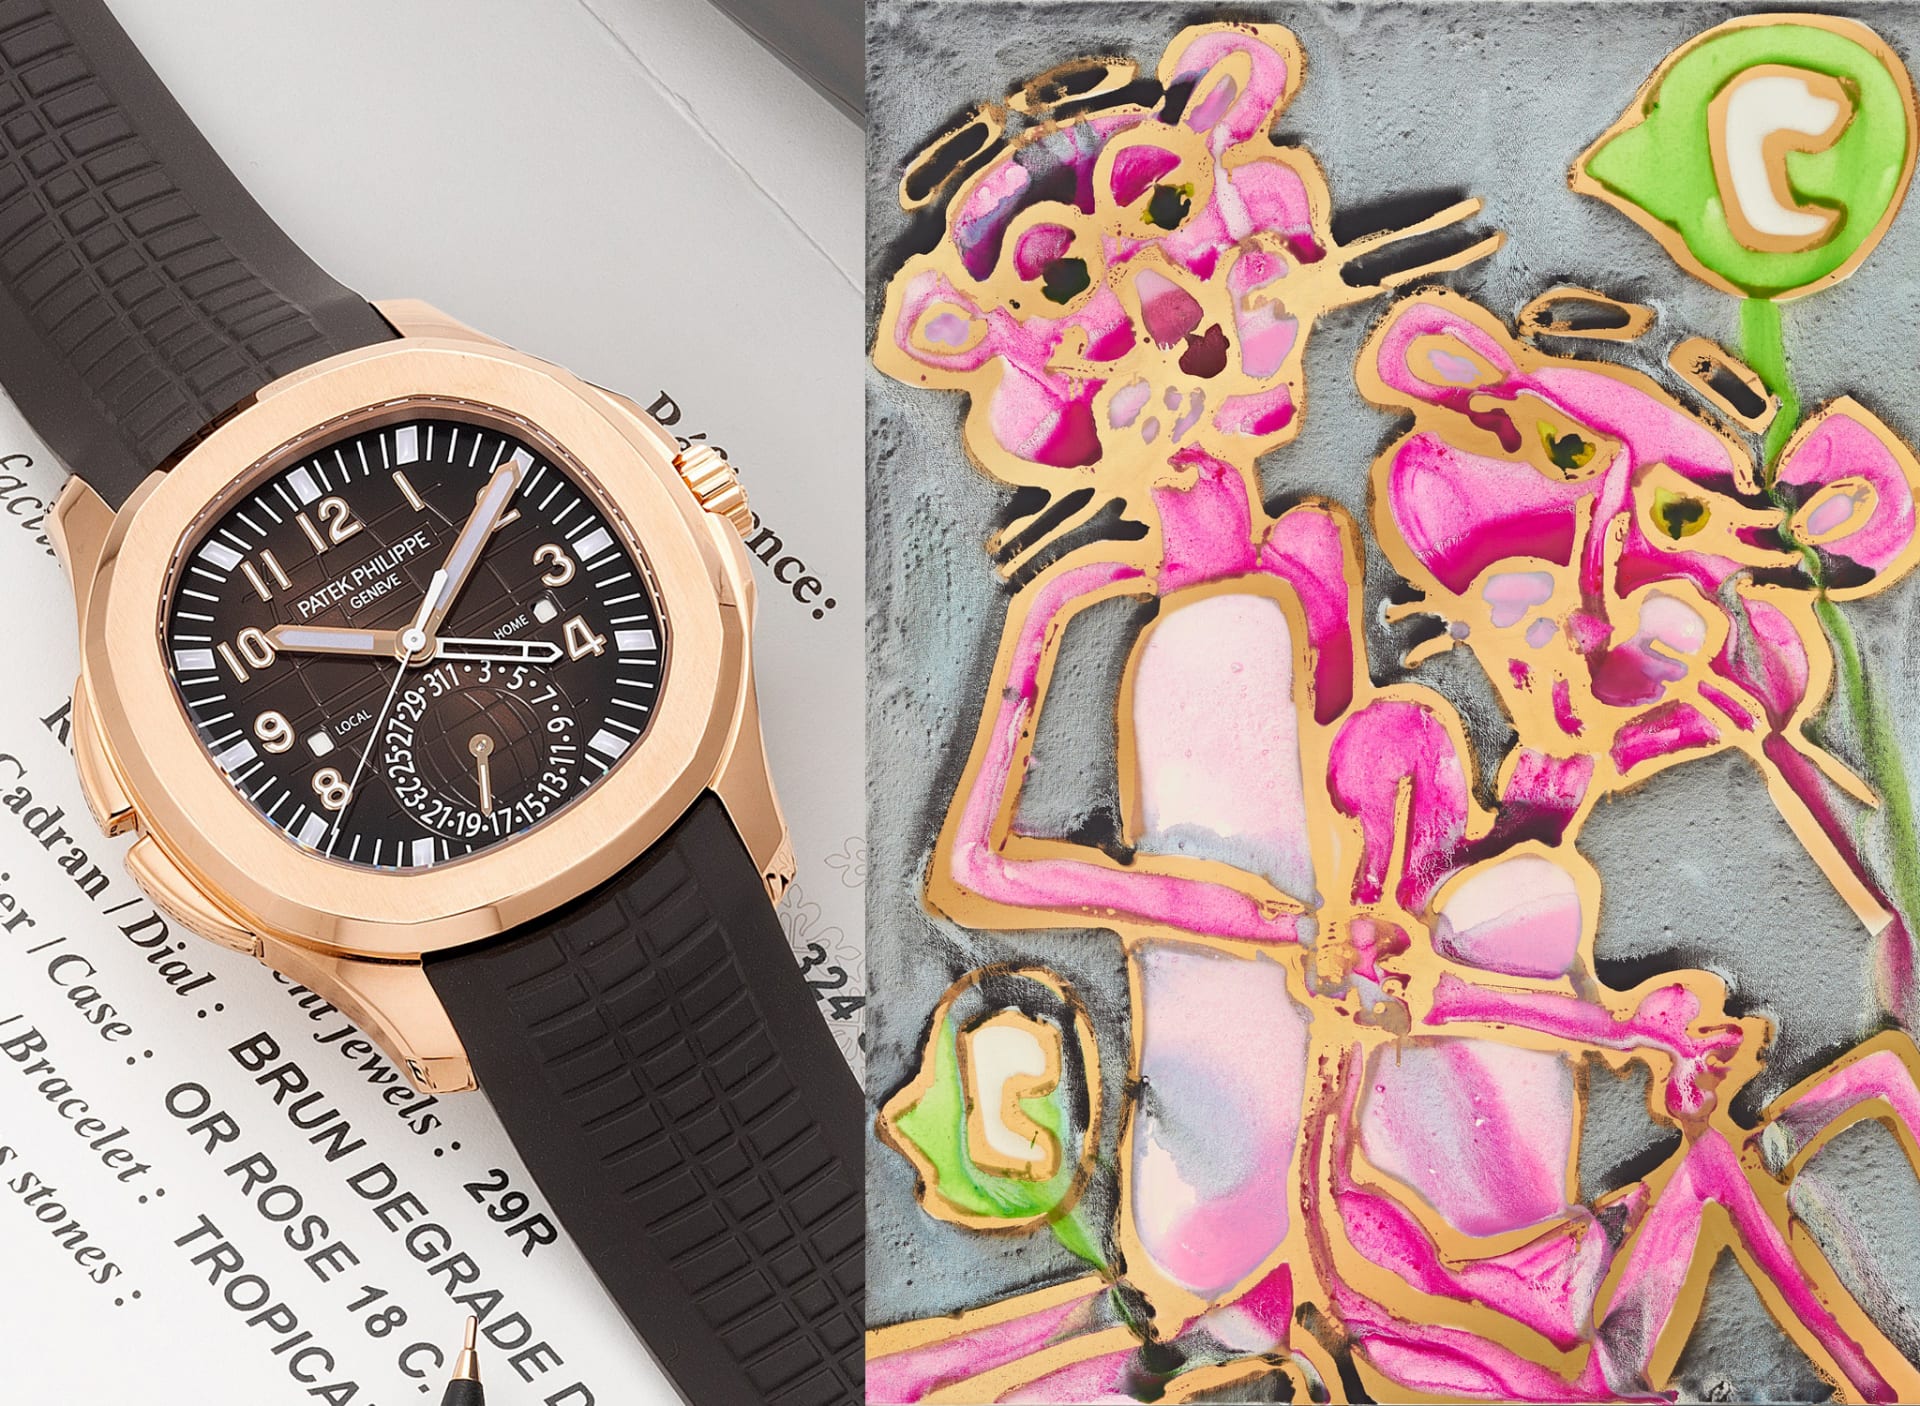 Patek philippe and pink panther